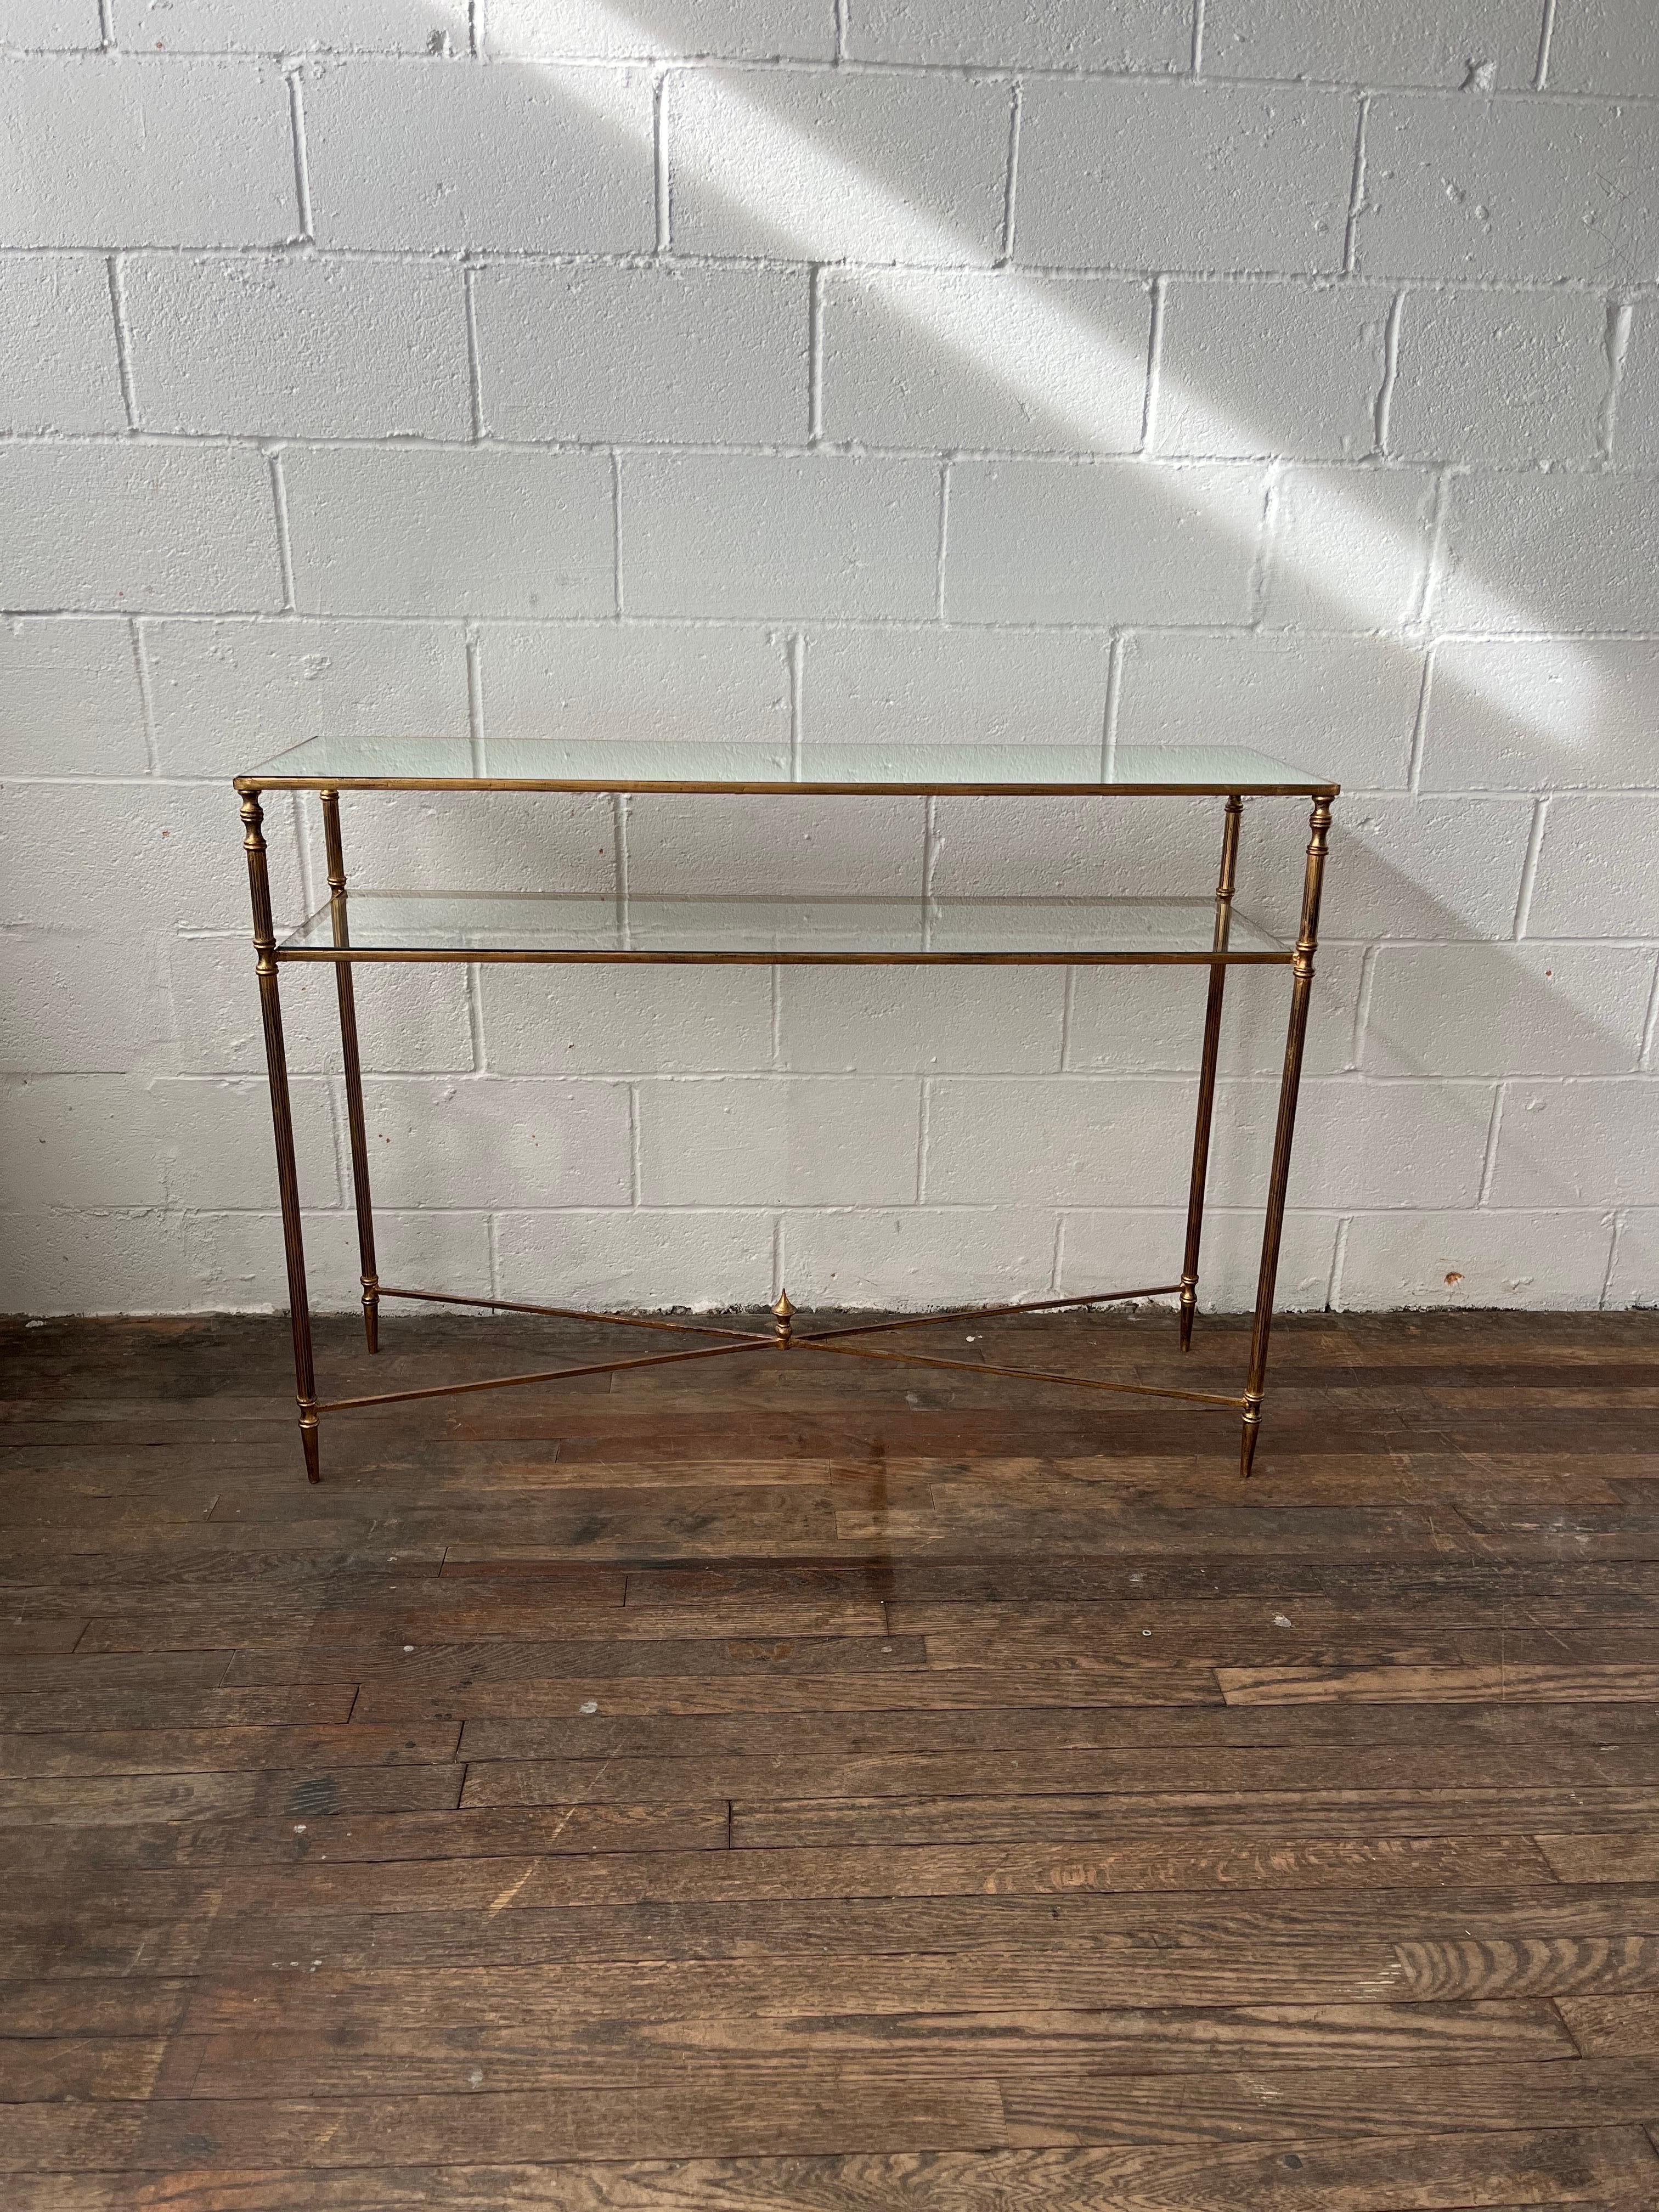 Forged tiered iron frame and iron cross stretchers in antiqued gold leaf. Top is reinforced mirror and gallery shelf is clear tempered glass. Lightweight with style that packs a punch. 
Curbside to NYC/Philly $300